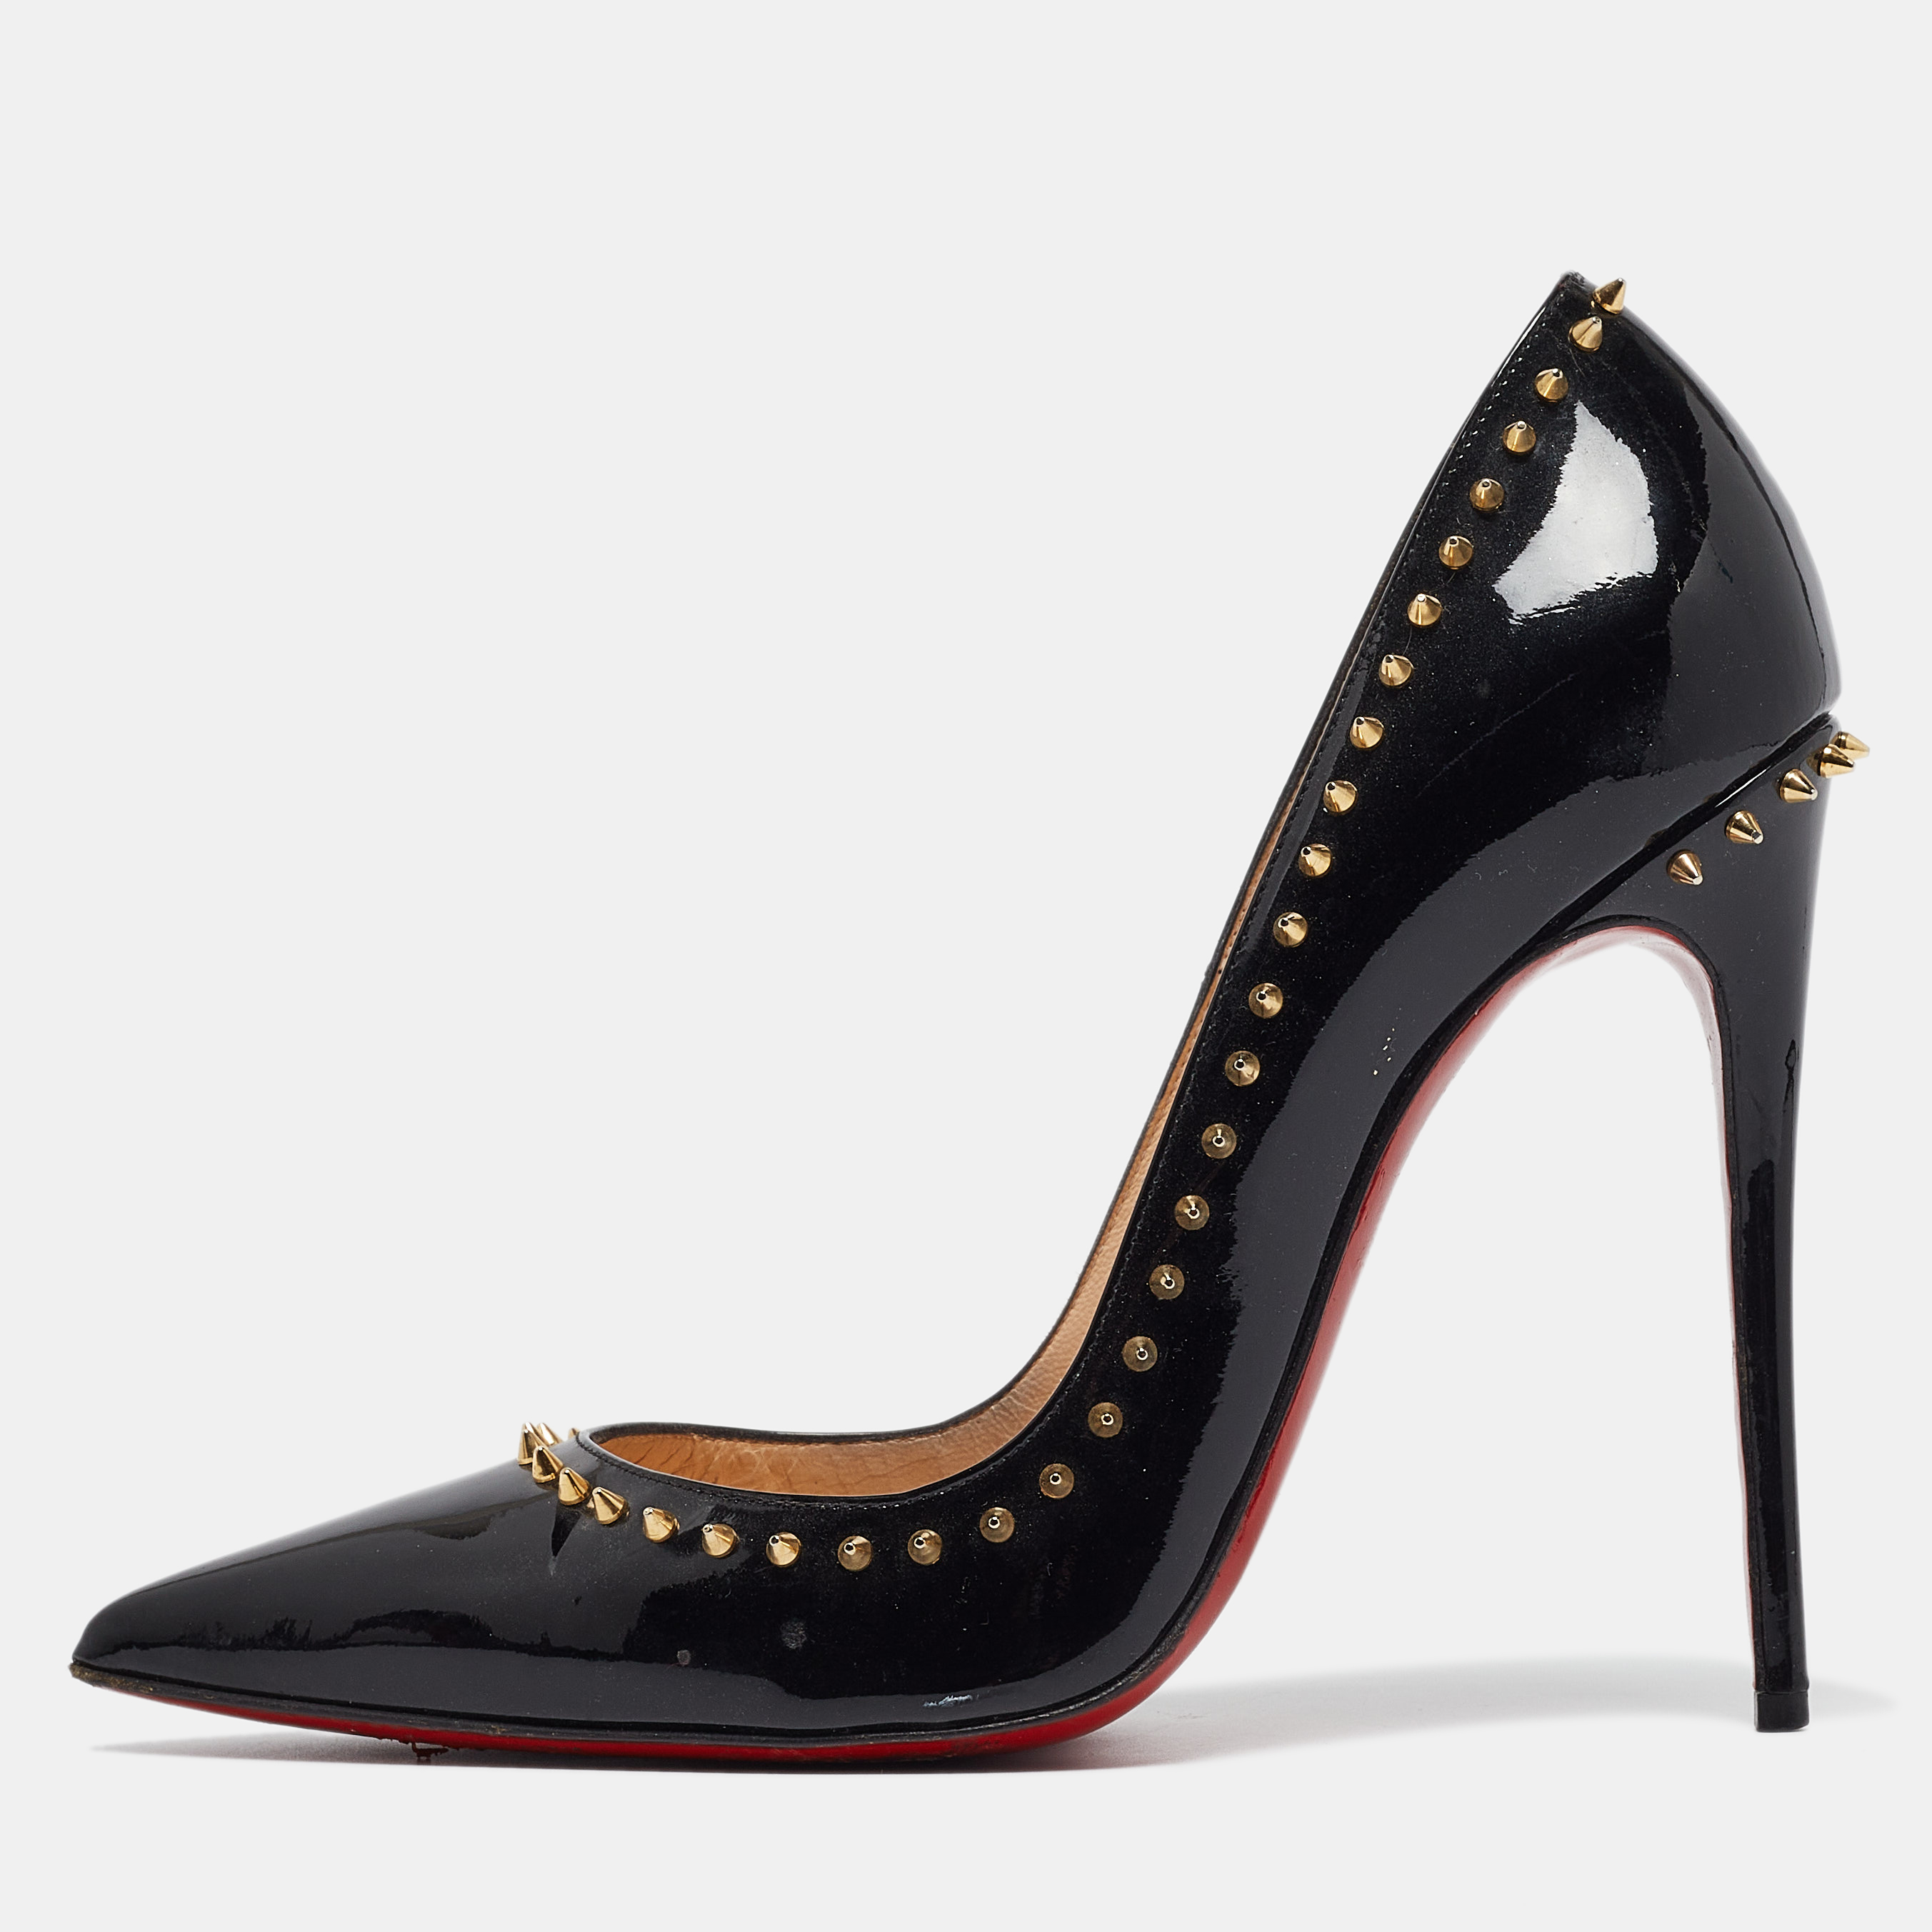 Pre-owned Christian Louboutin Black Patent Leather Anjalina Pumps Size 38.5